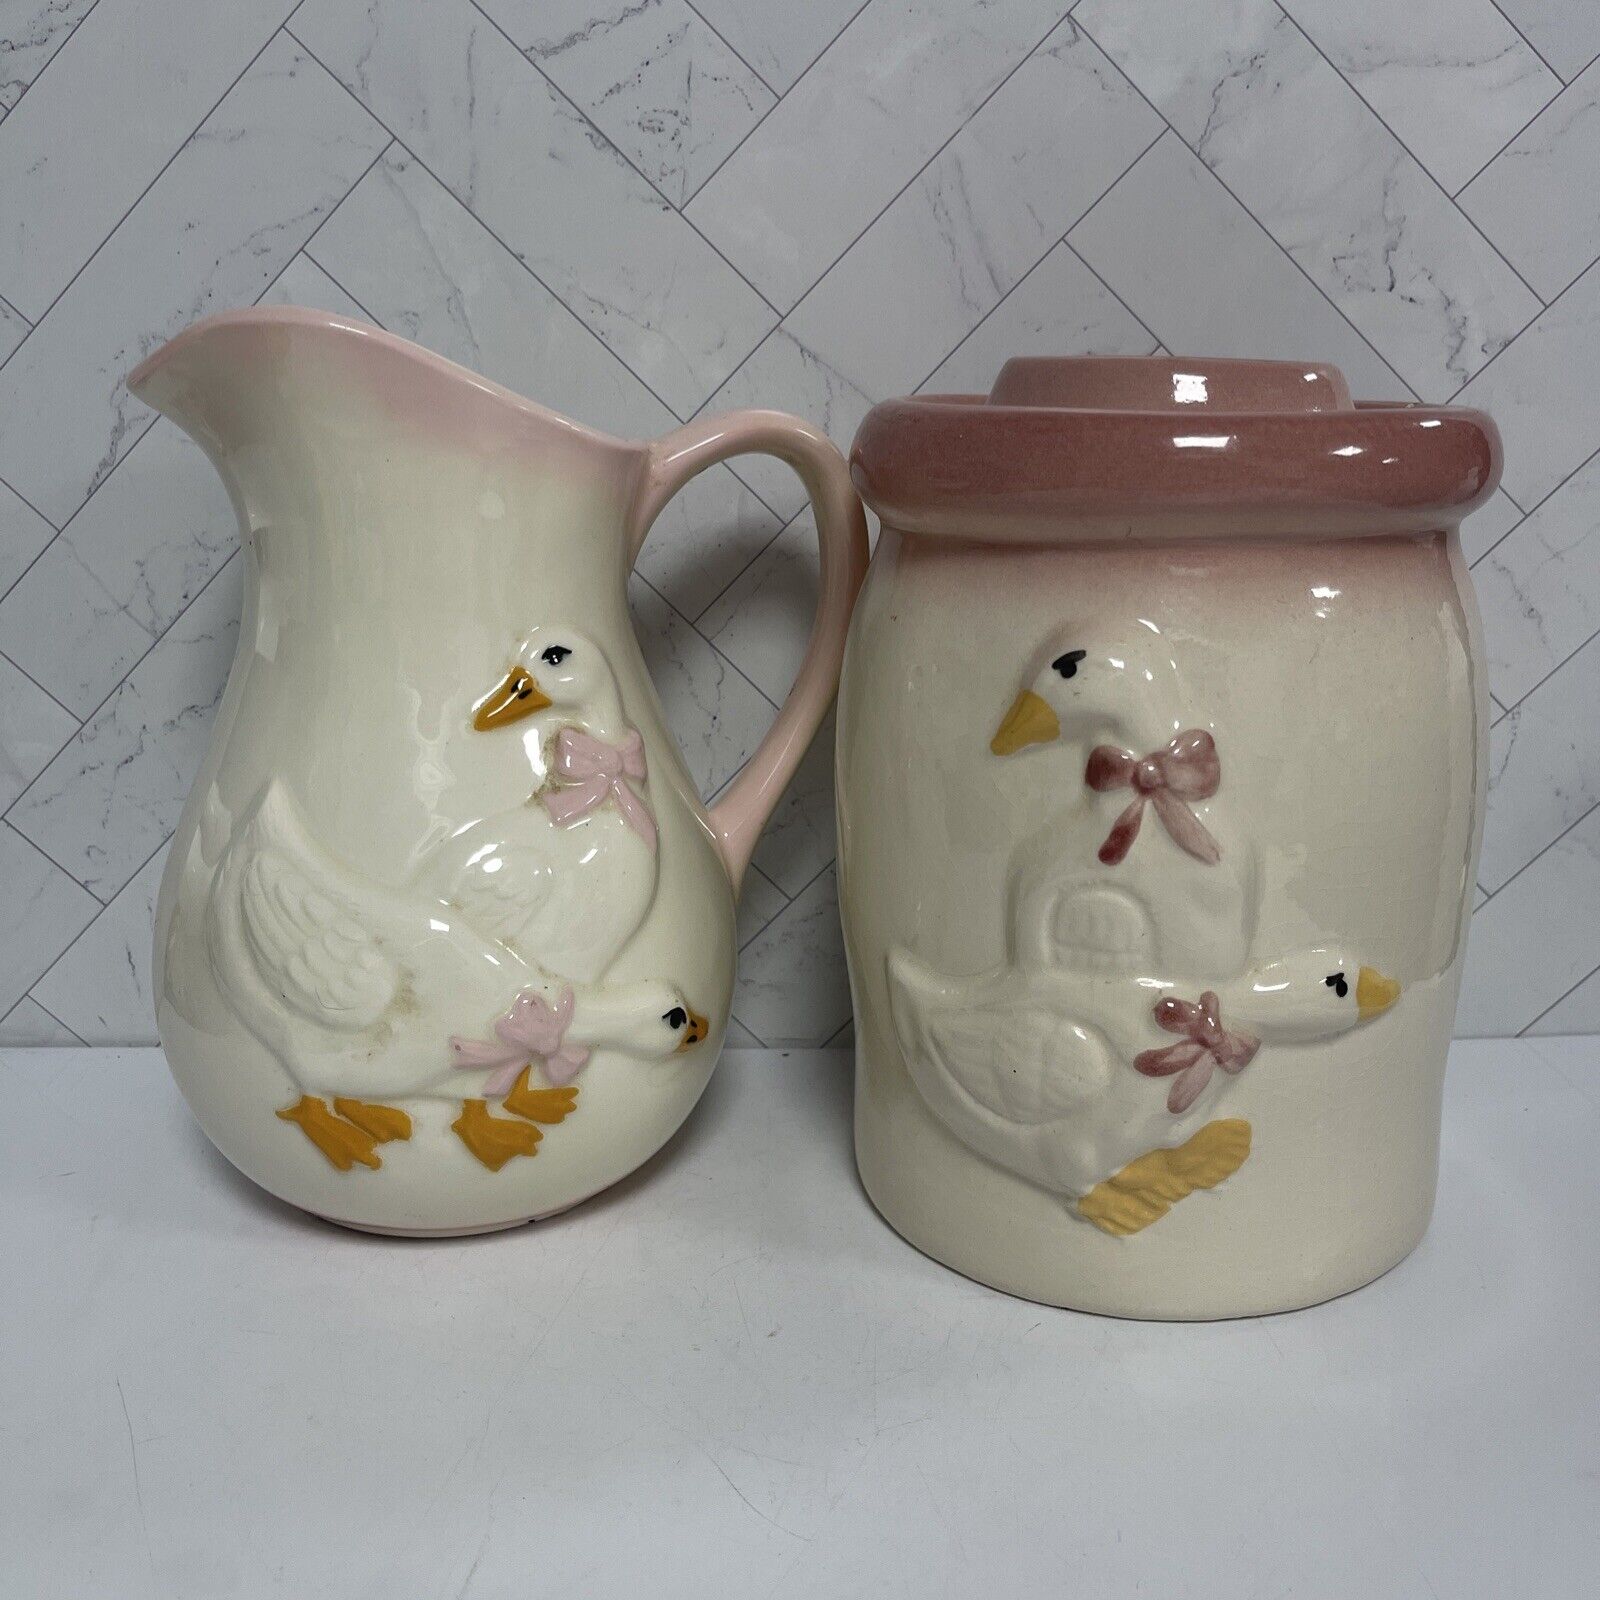 Vintage Pink Bow Geese Pitcher & Cannister w/ Lid Set - Pink & White - Ceramic